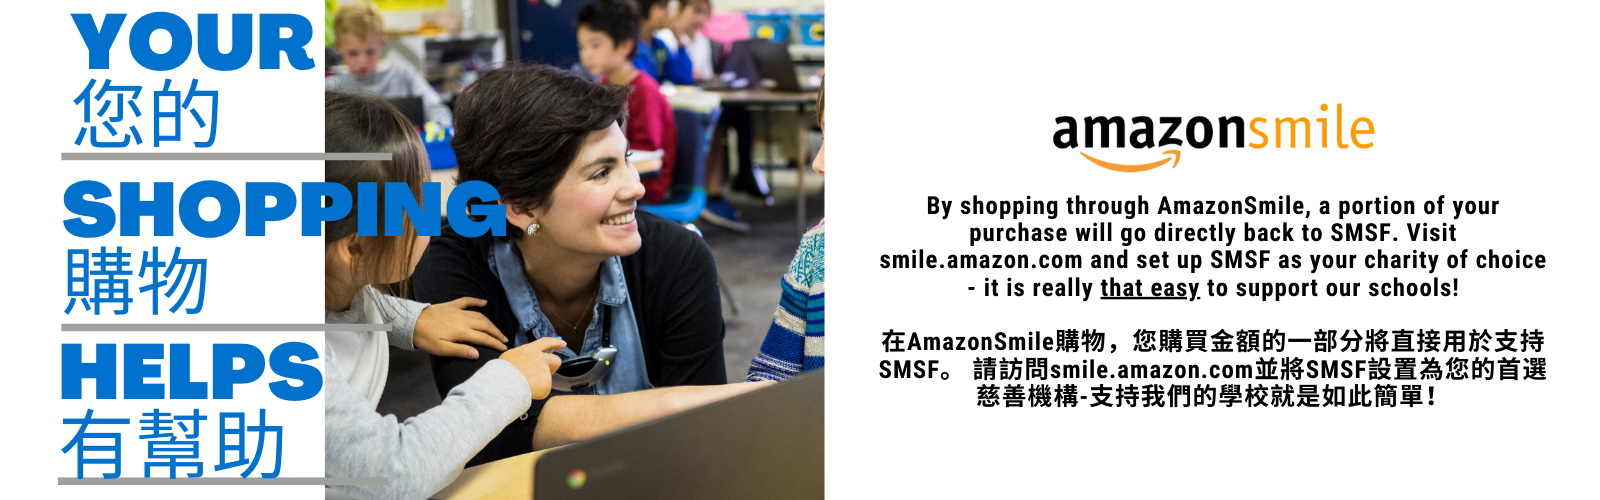 Support SMSF and Shop Through AmazonSmile!